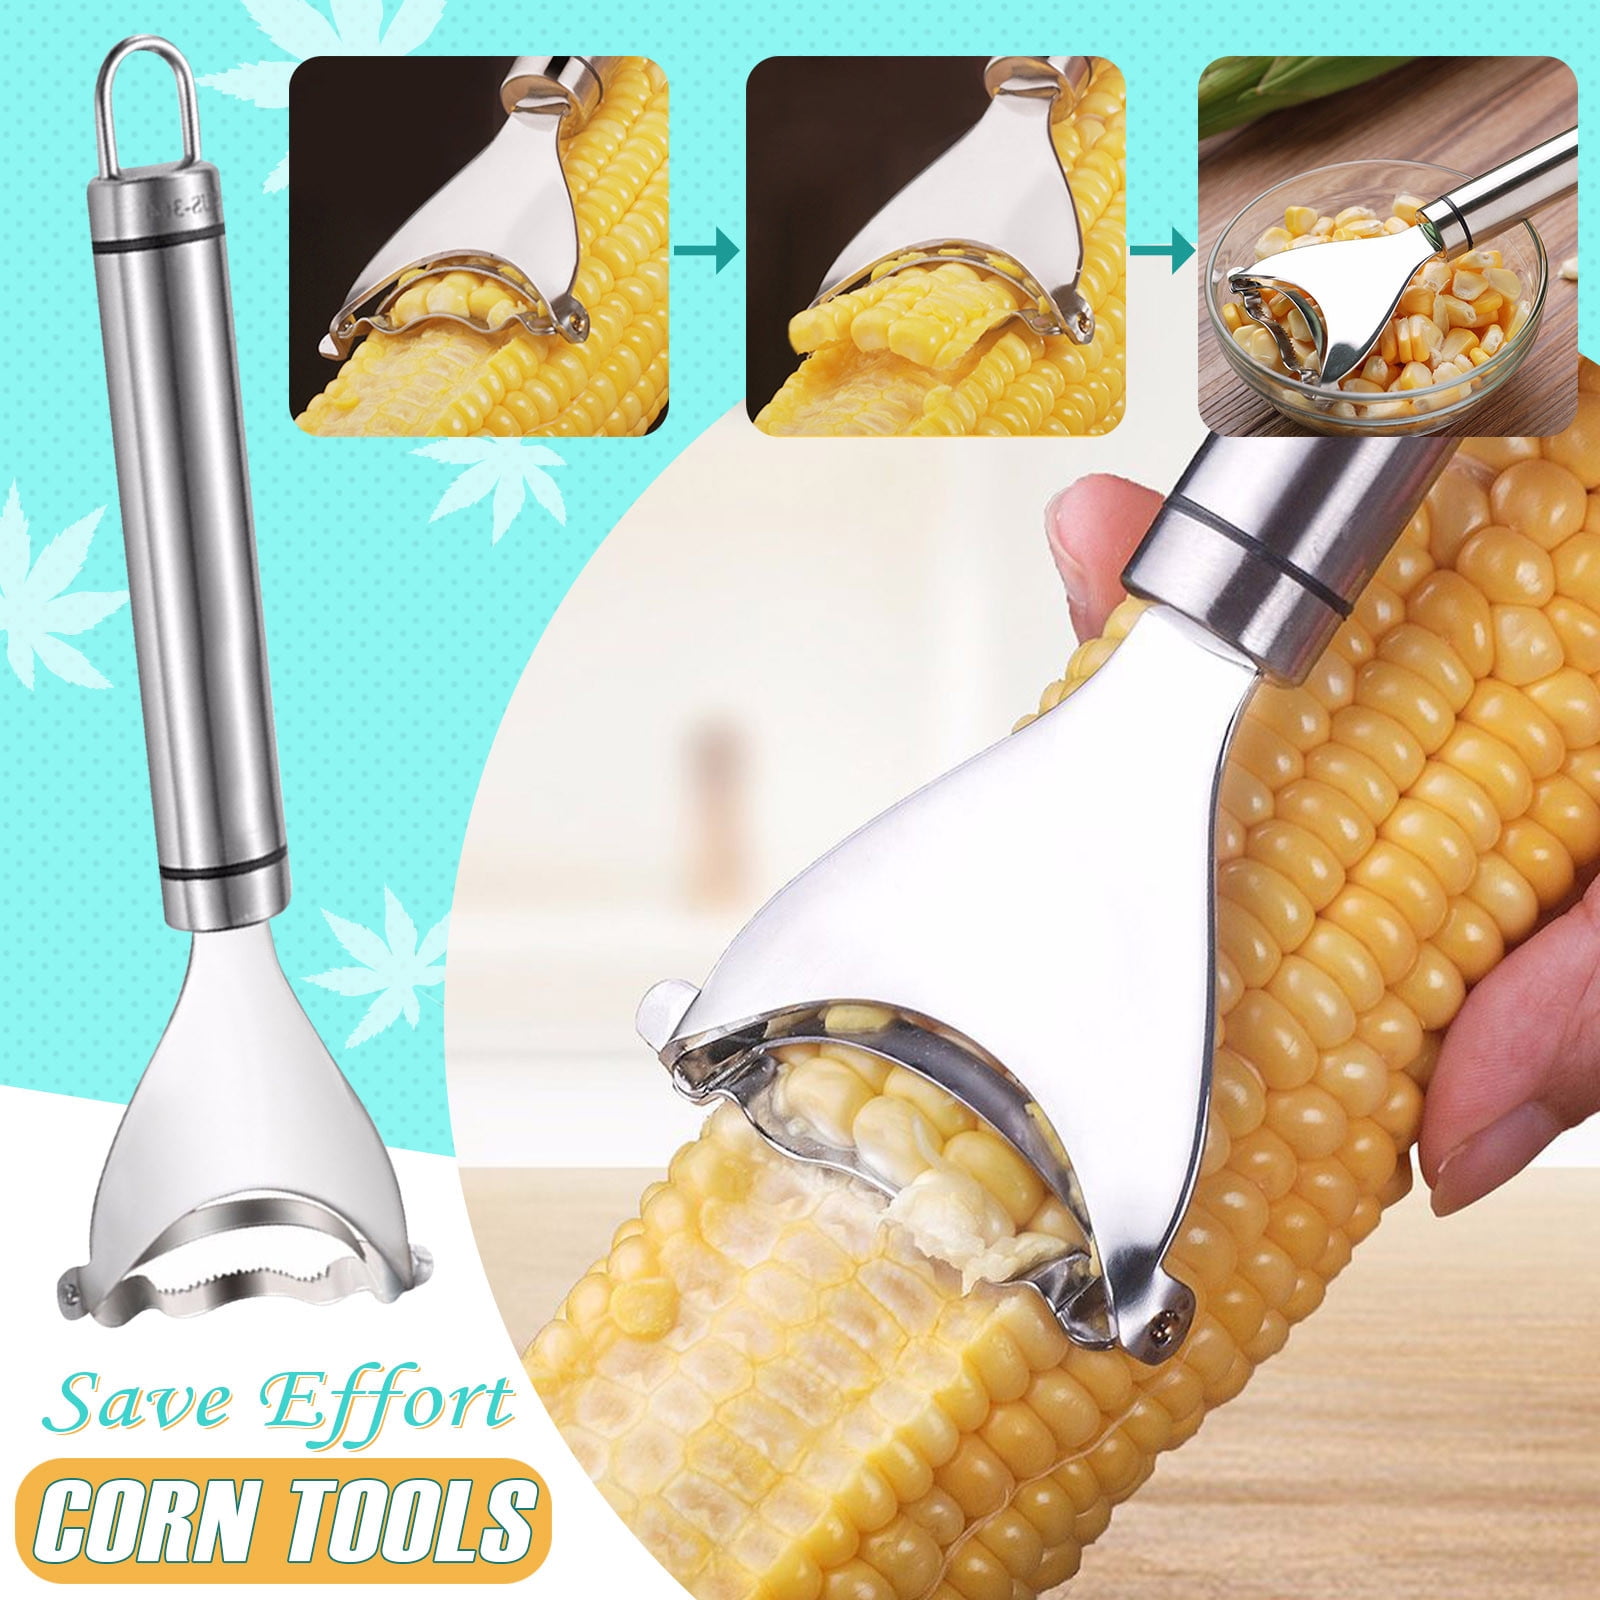 X8 Stainless Steel Corn on The COB Holders Party Gadget BBQ Prongs Skewers Forks 